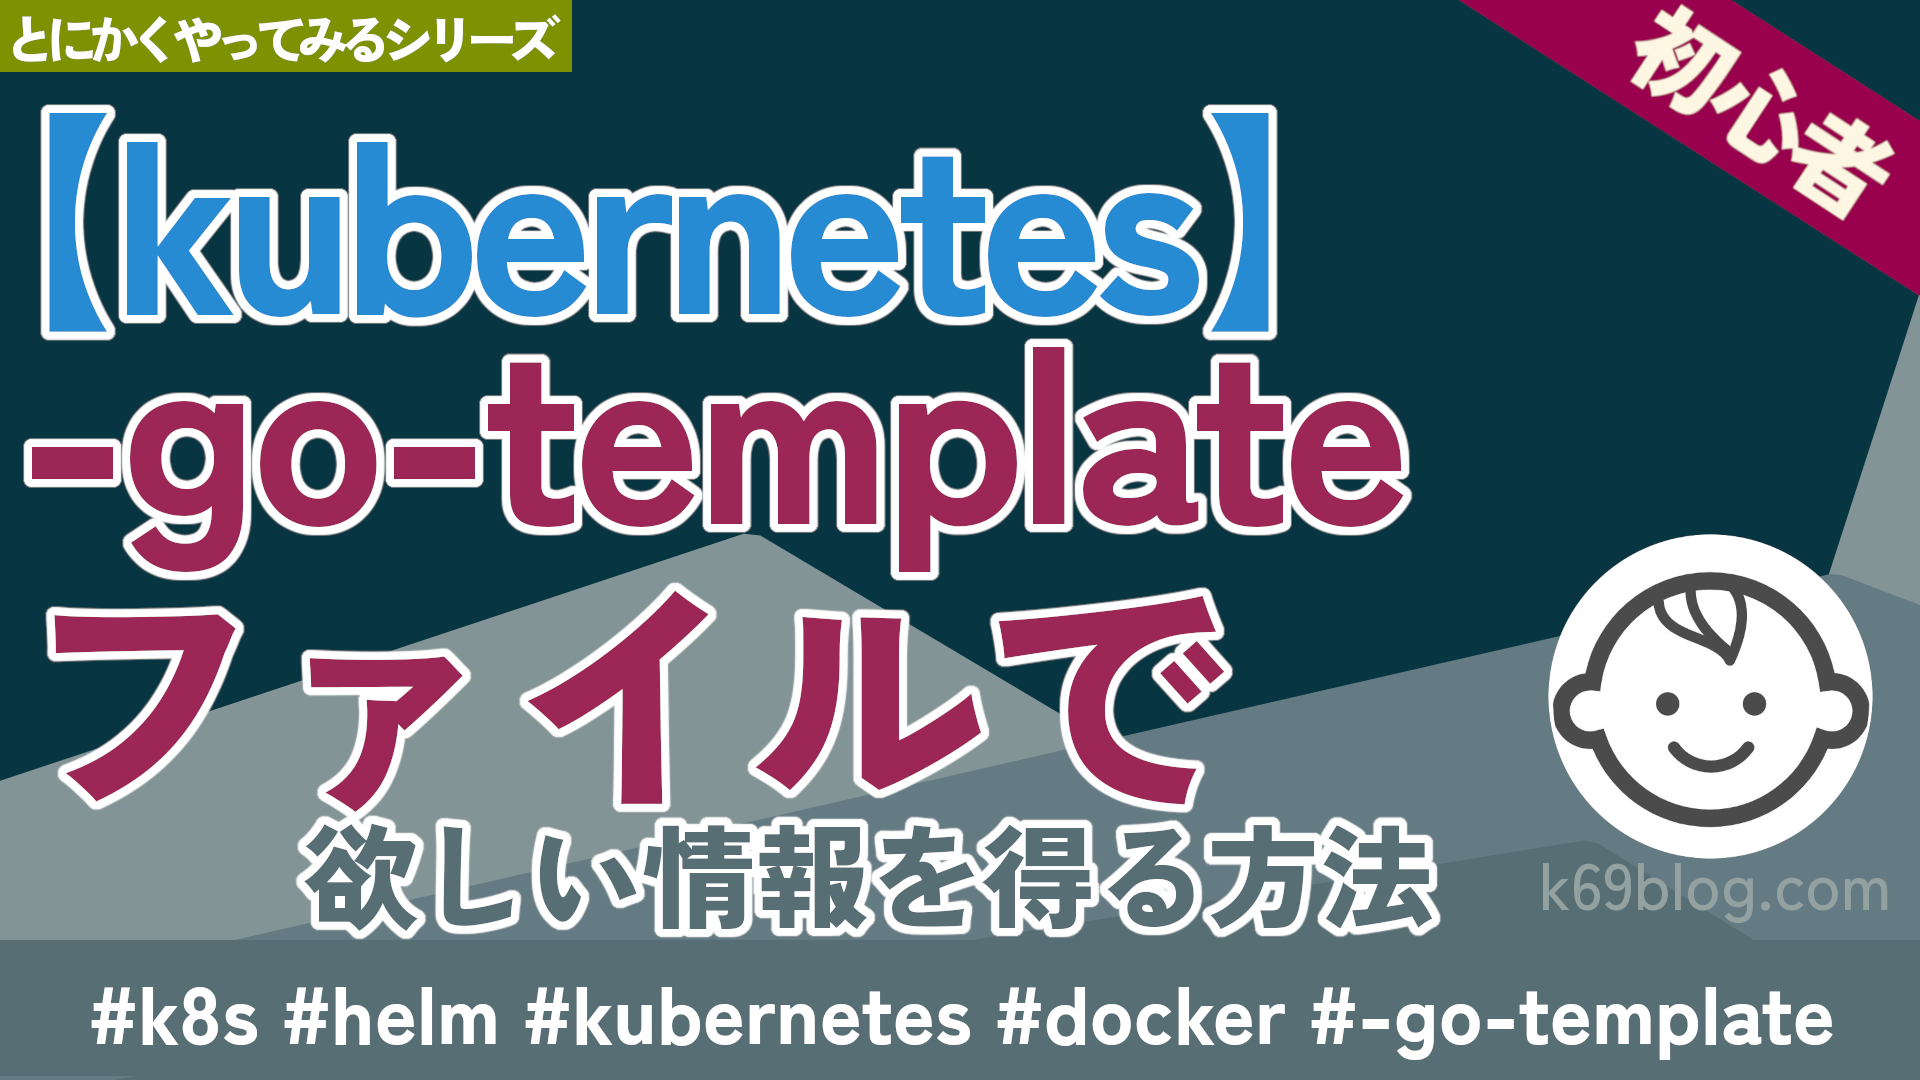 Cover Image for 【kubernetes】-go-templateファイルで欲しい情報を得る方法